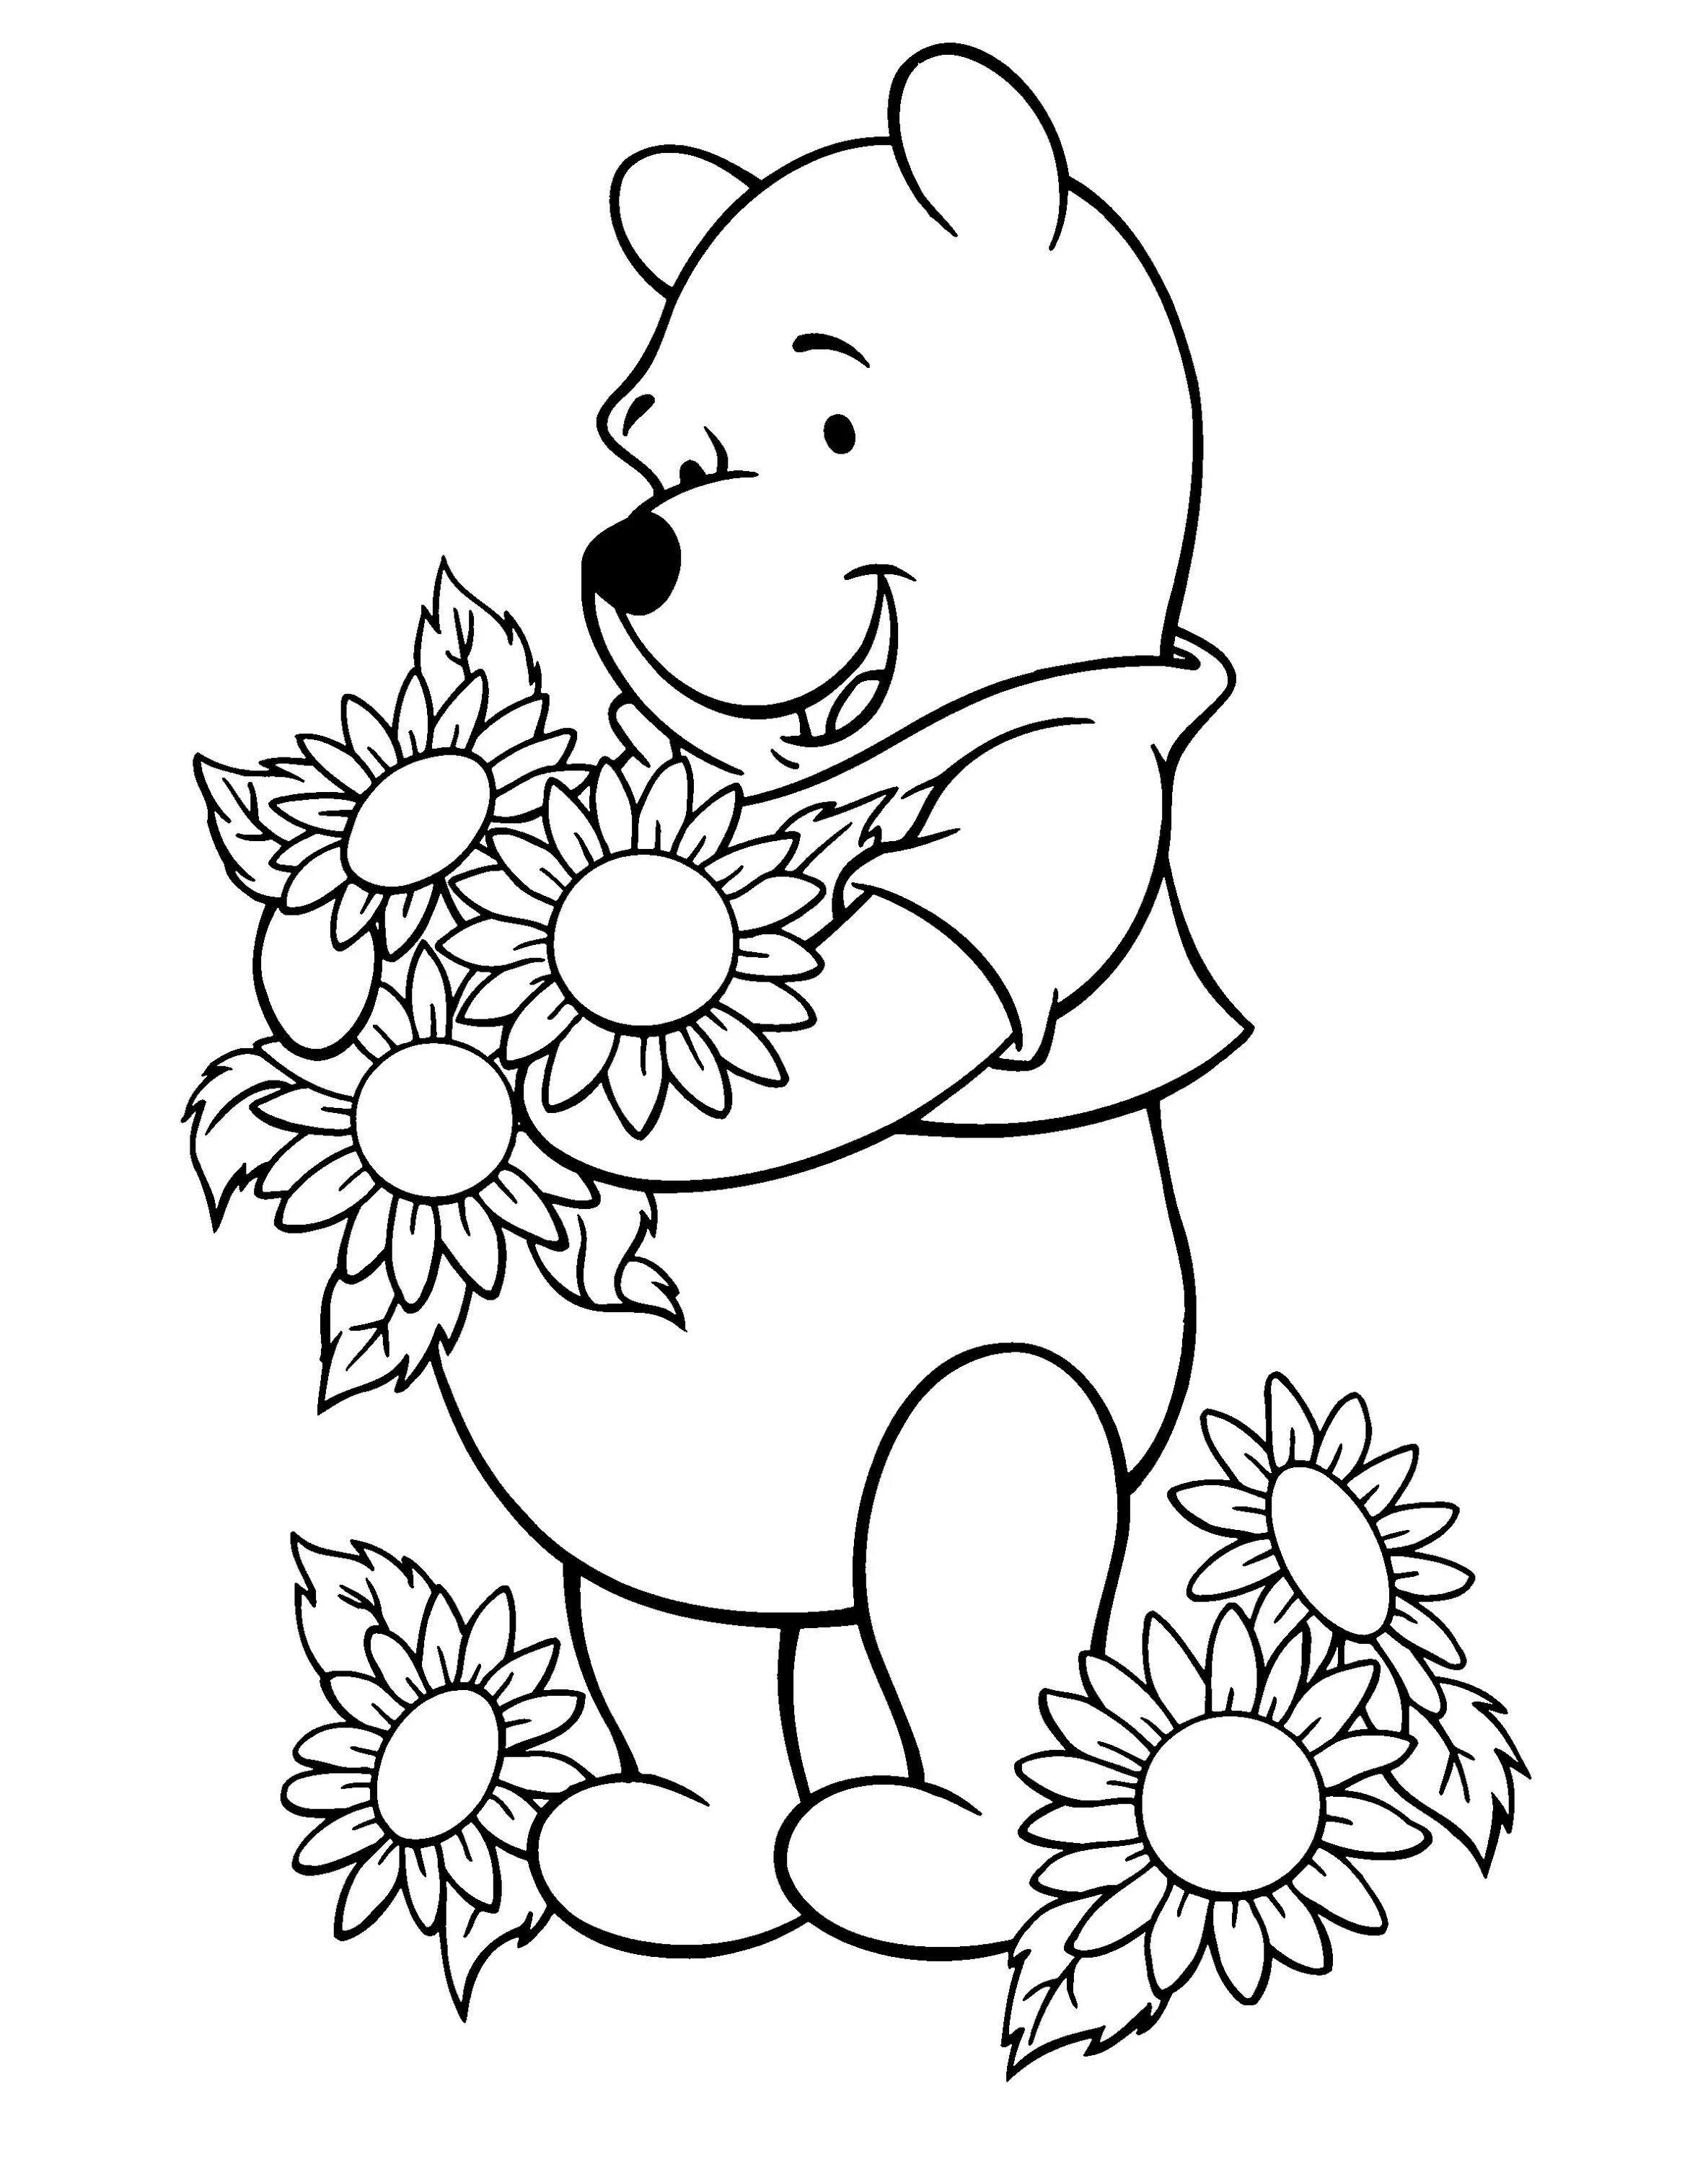 Amazing coloring book download